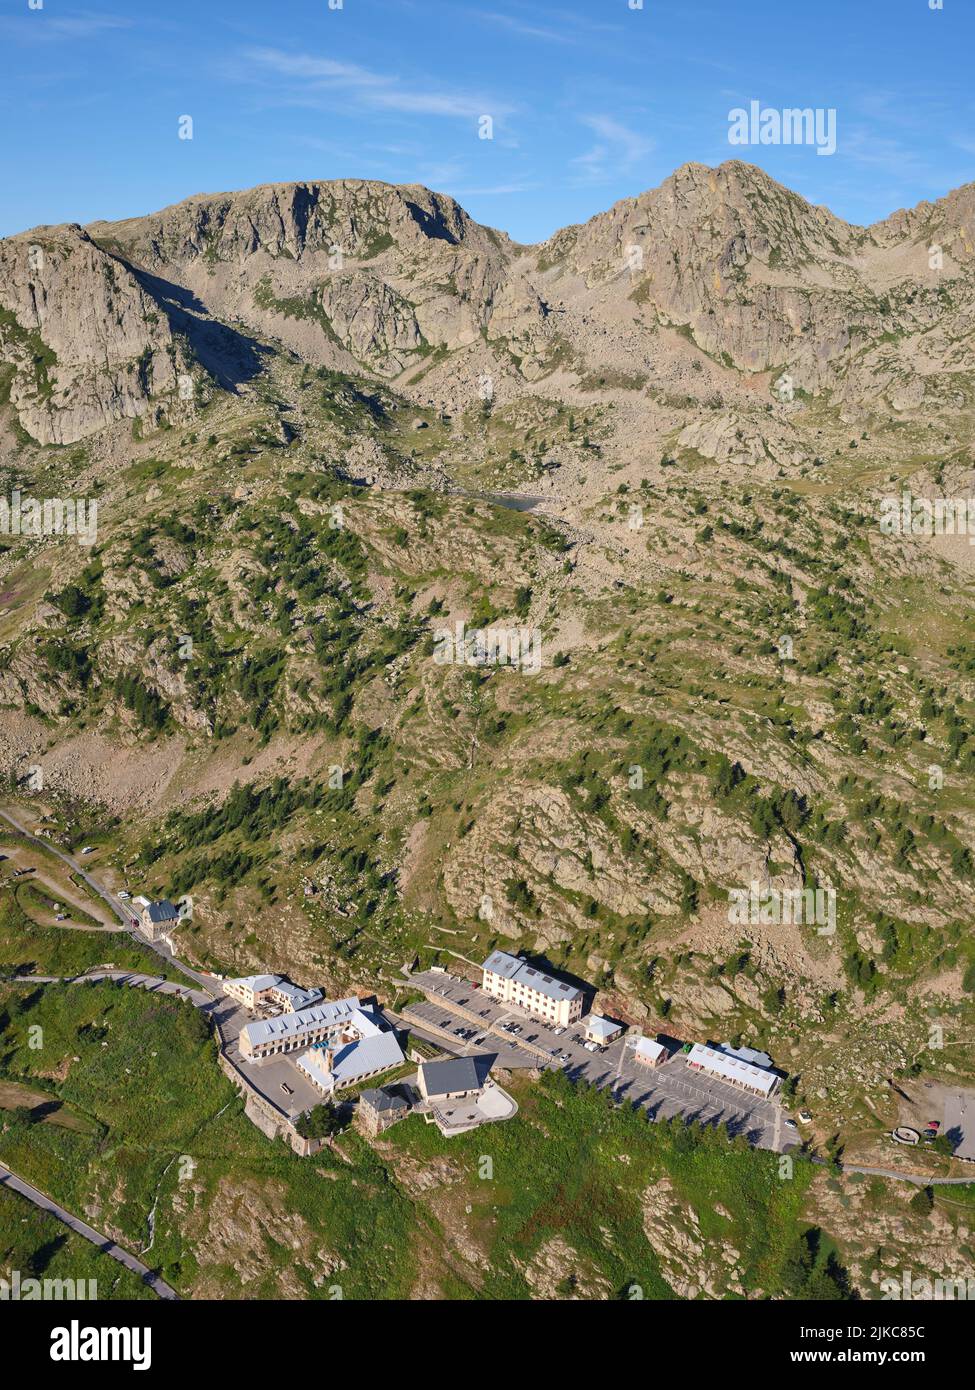 AERIAL VIEW. Sanctuary located in a remote location at 2035 meters asl. Sant'Anna Sanctuary, Vinadio, Province of Cuneo, Piedmont, Italy. Stock Photo